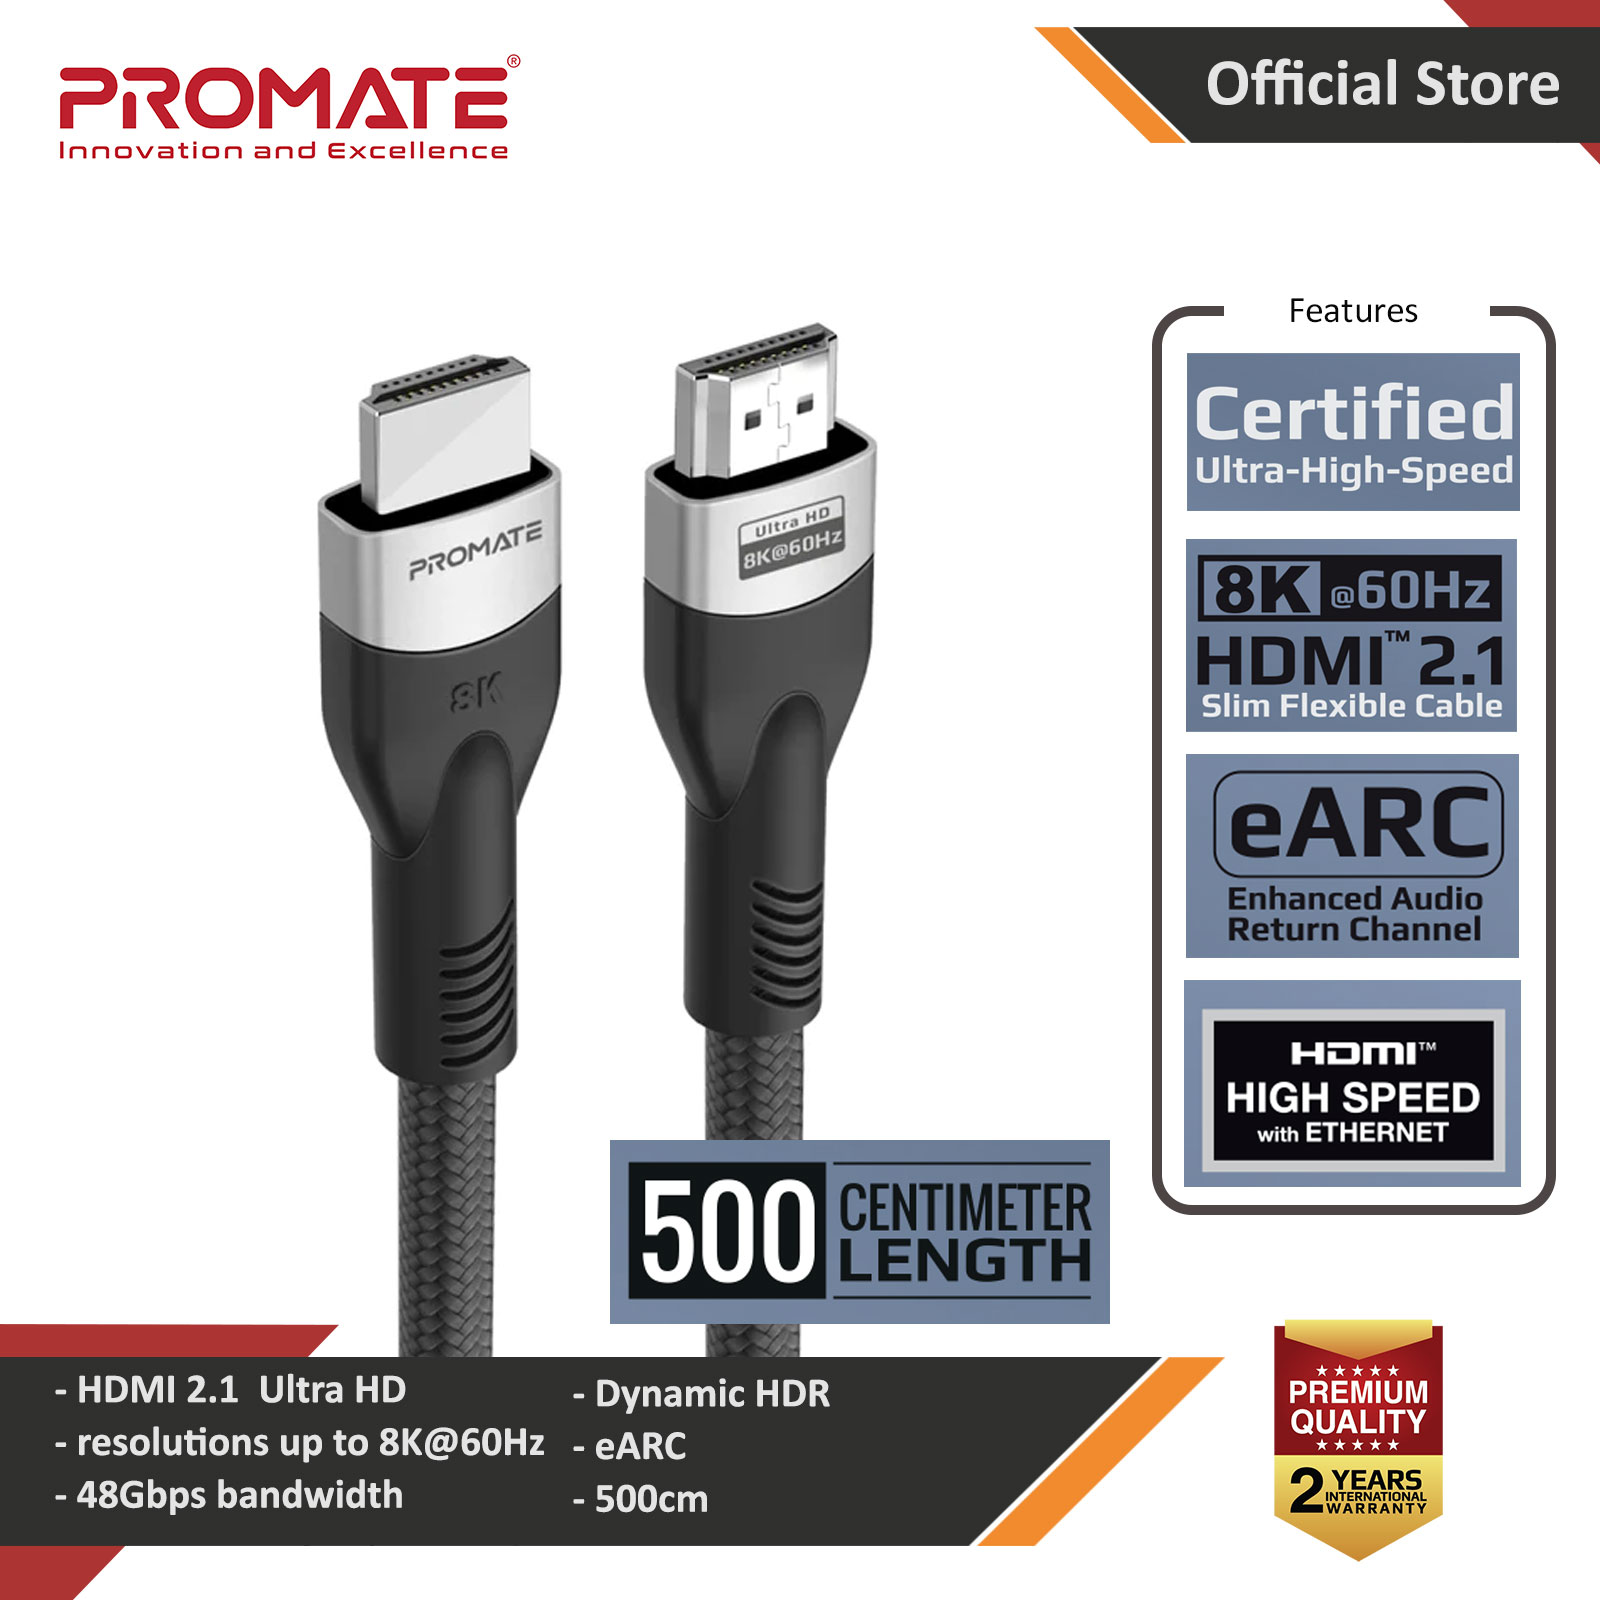 Picture of PROMATE Primelink8K-500 Ultra HD High Speed 8K HDMI 2.1 Ultra HD Audio Video Cable HDR Colour Support eARC Connectivity Dolby Vision 5 meter Plug and Play 500cm Cable Length Red Design- Red Design Cases, Red Design Covers, iPad Cases and a wide selection of Red Design Accessories in Malaysia, Sabah, Sarawak and Singapore 